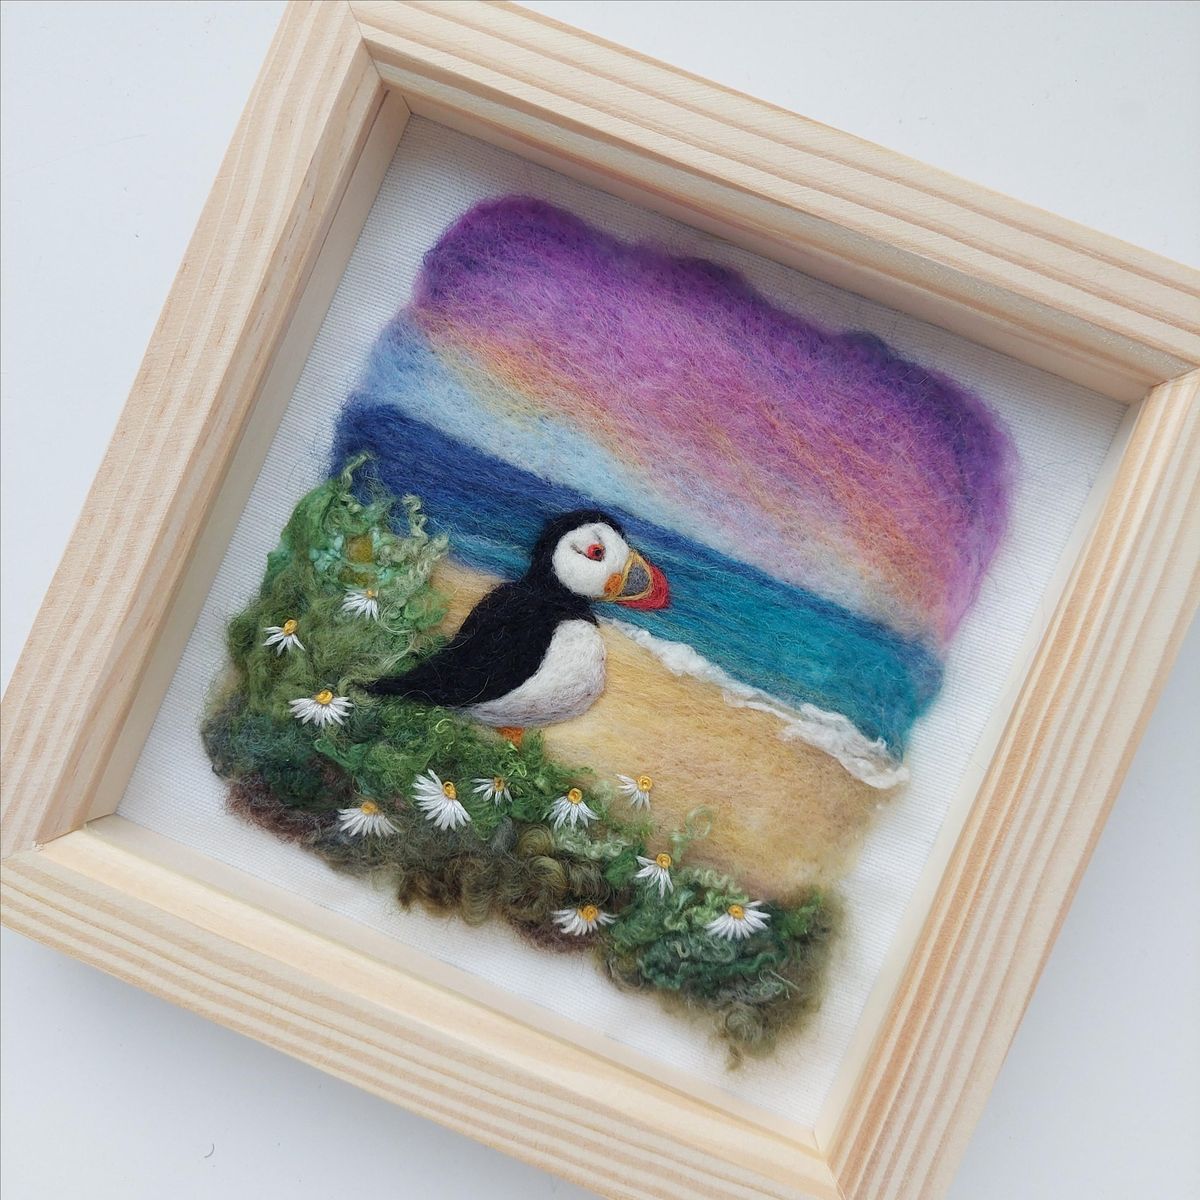 Felting a Puffin Picture